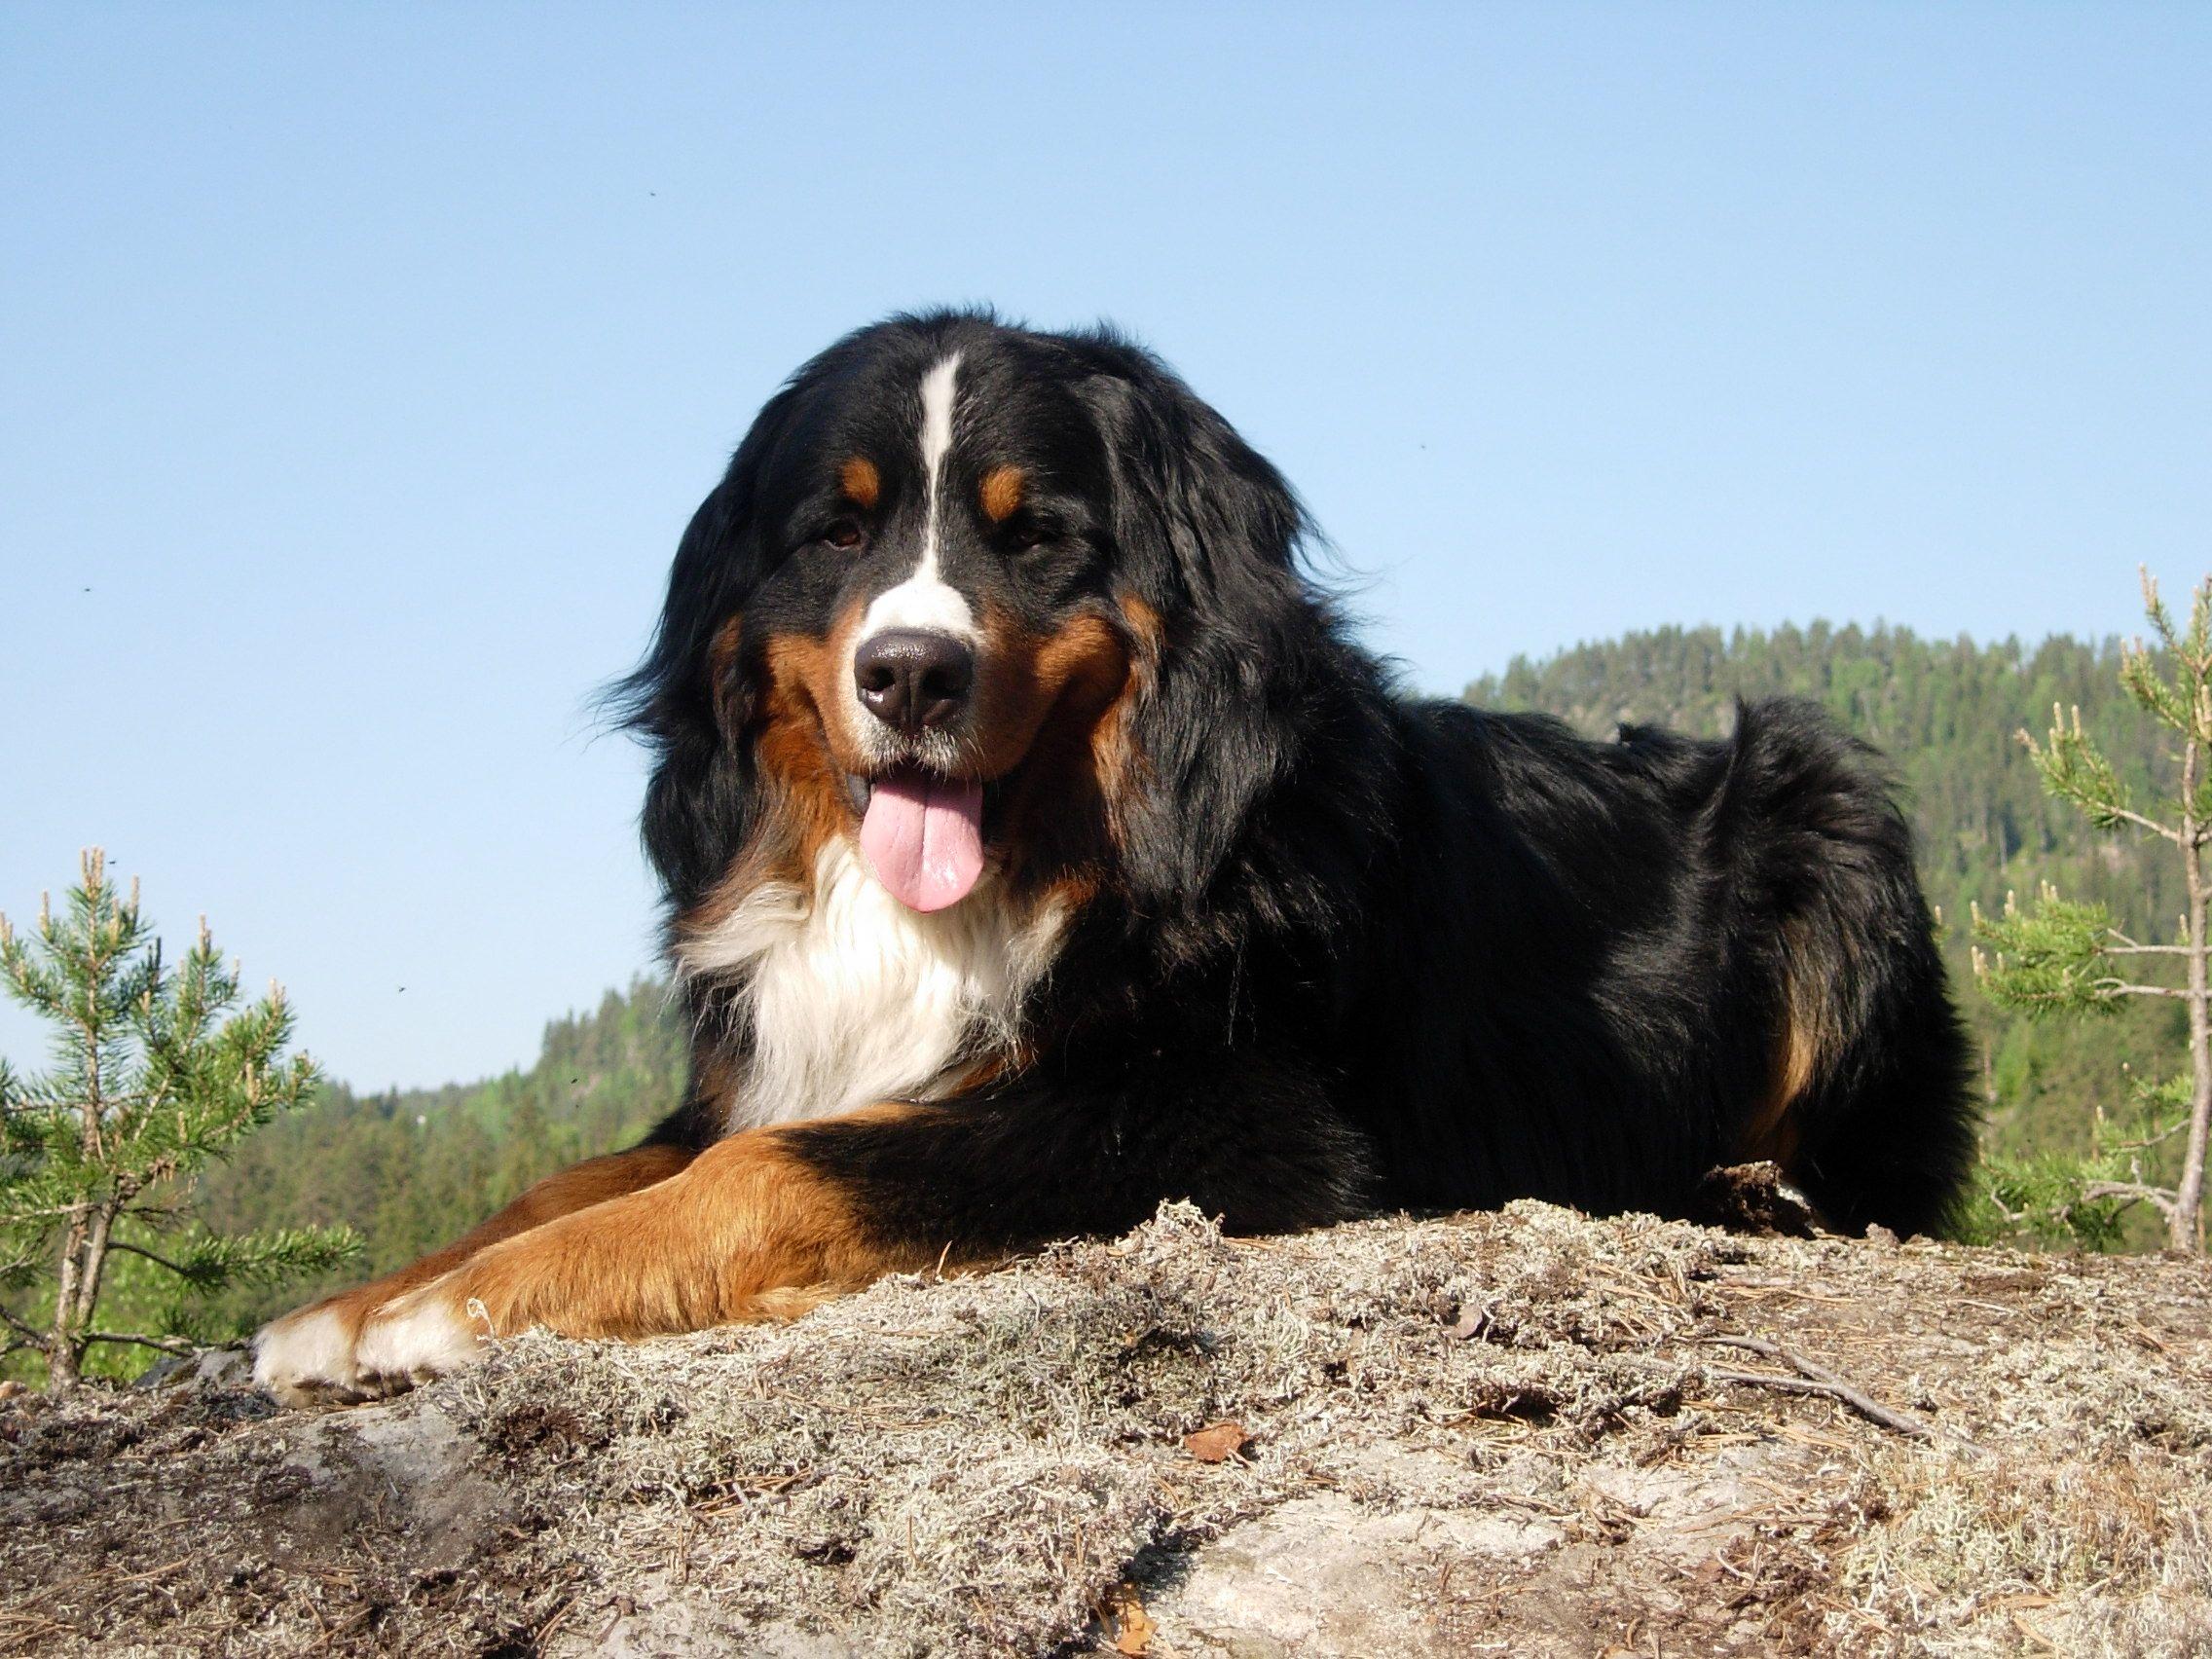 Bernese Mountain Dog on the hill photo and wallpaper. Beautiful